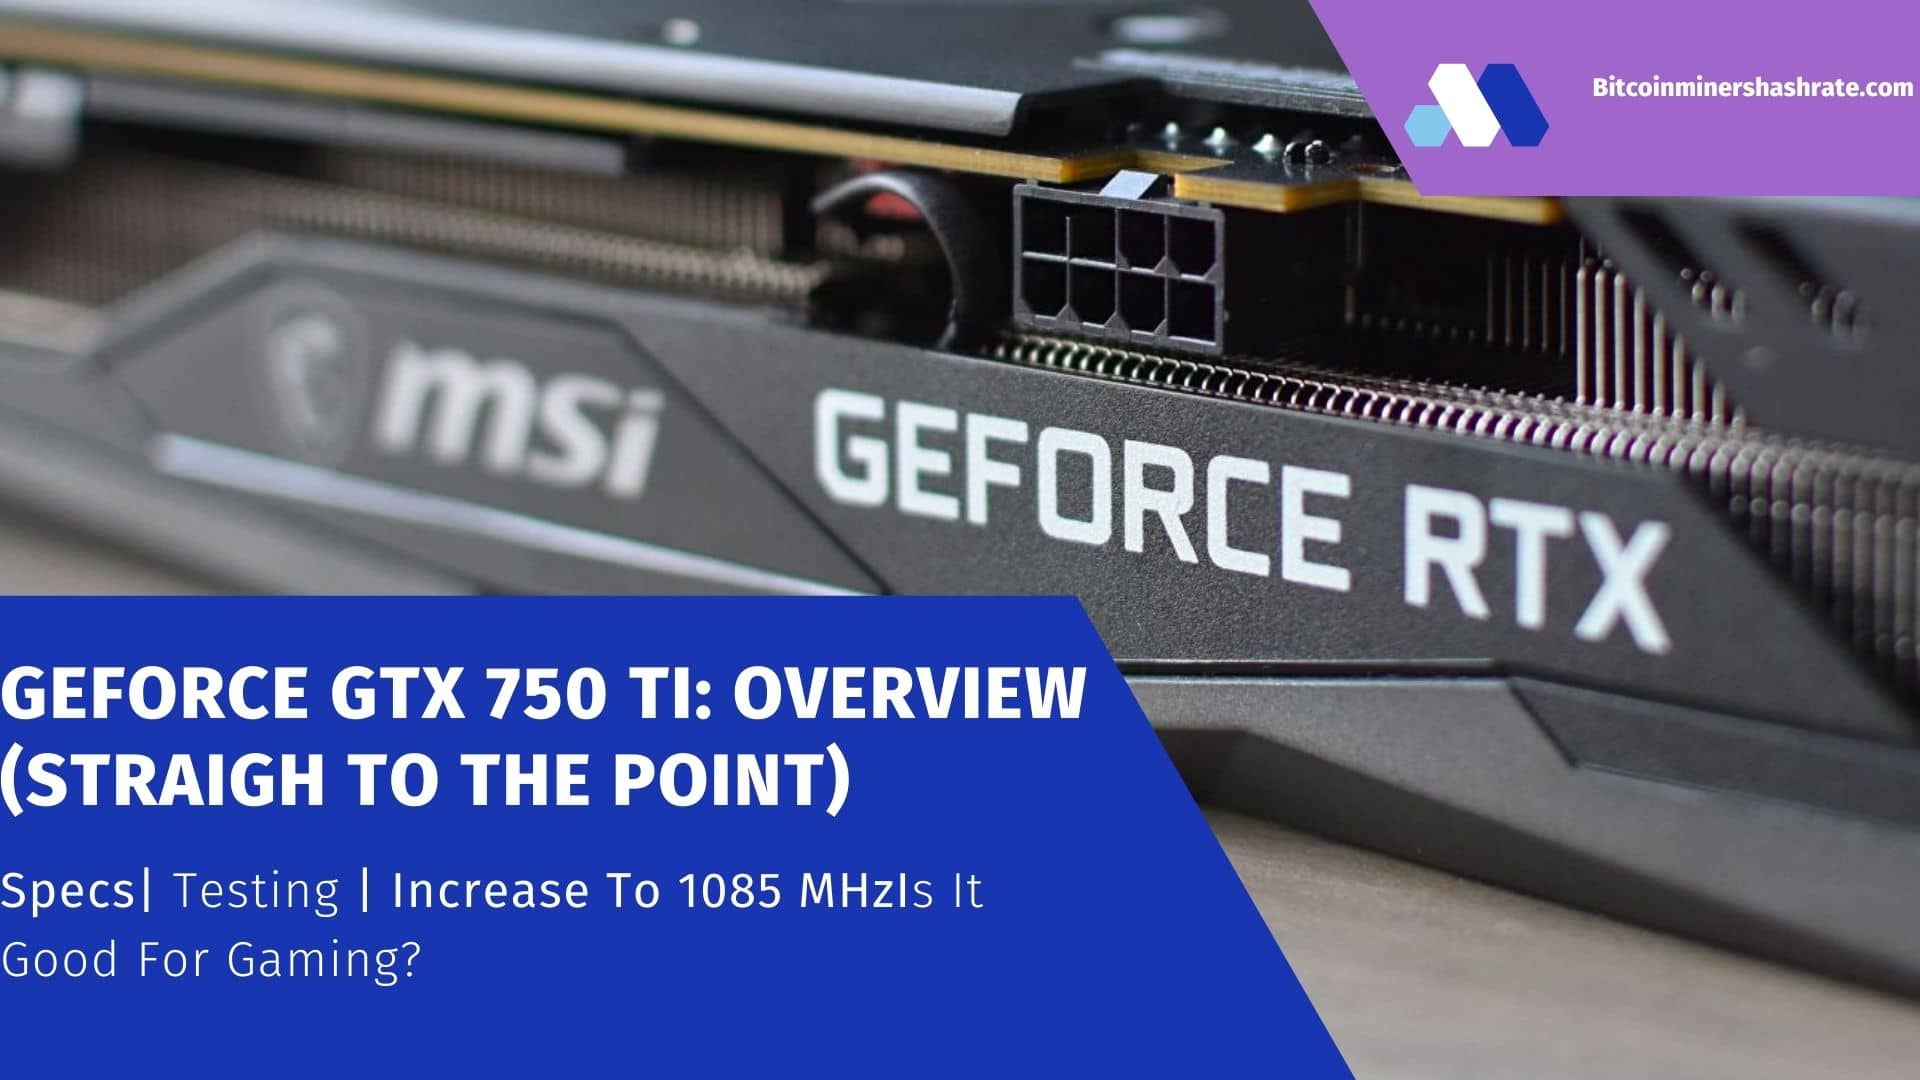 GeForce GTX 750 TI - Is it Good for Gaming